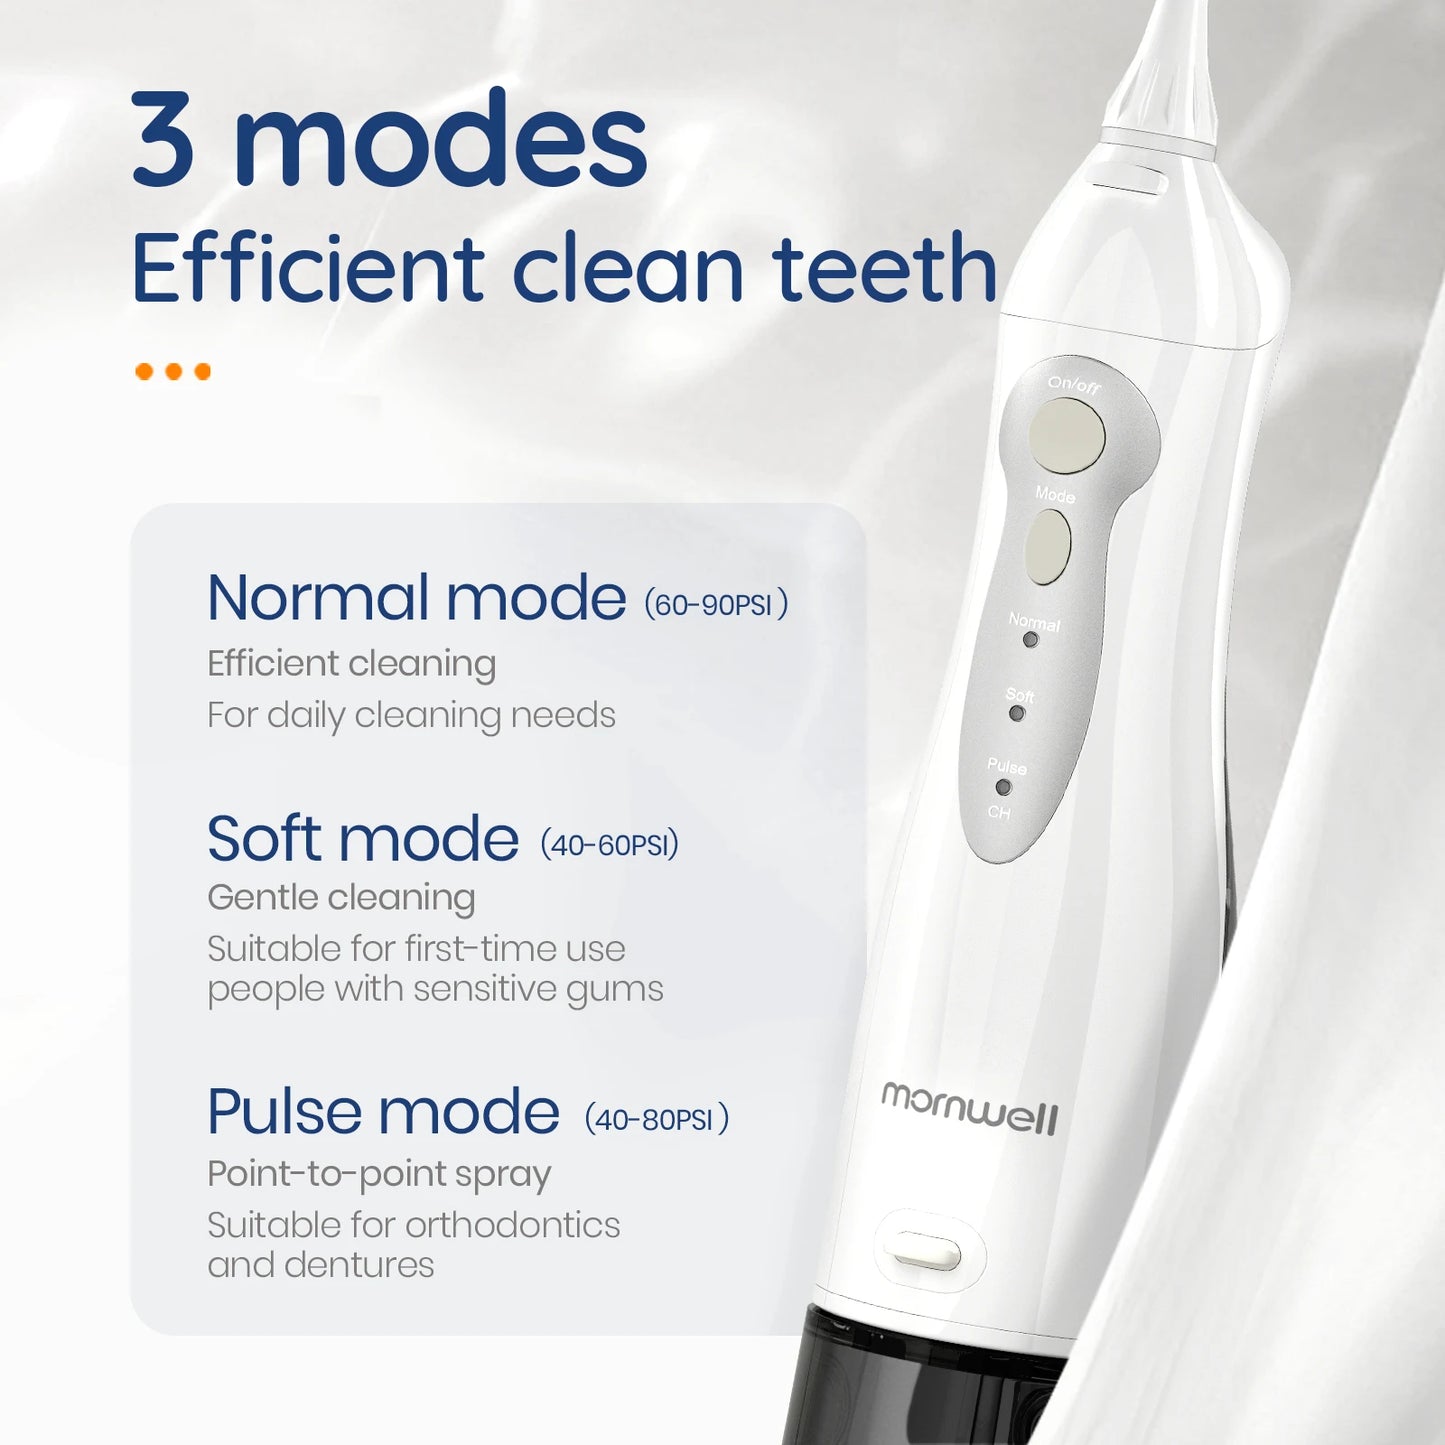 "HydroFresh Pro: USB Rechargeable Oral Irrigator - Portable Dental Water Flosser with 300ML Tank for Waterproof Teeth Cleaning On-The-Go!"